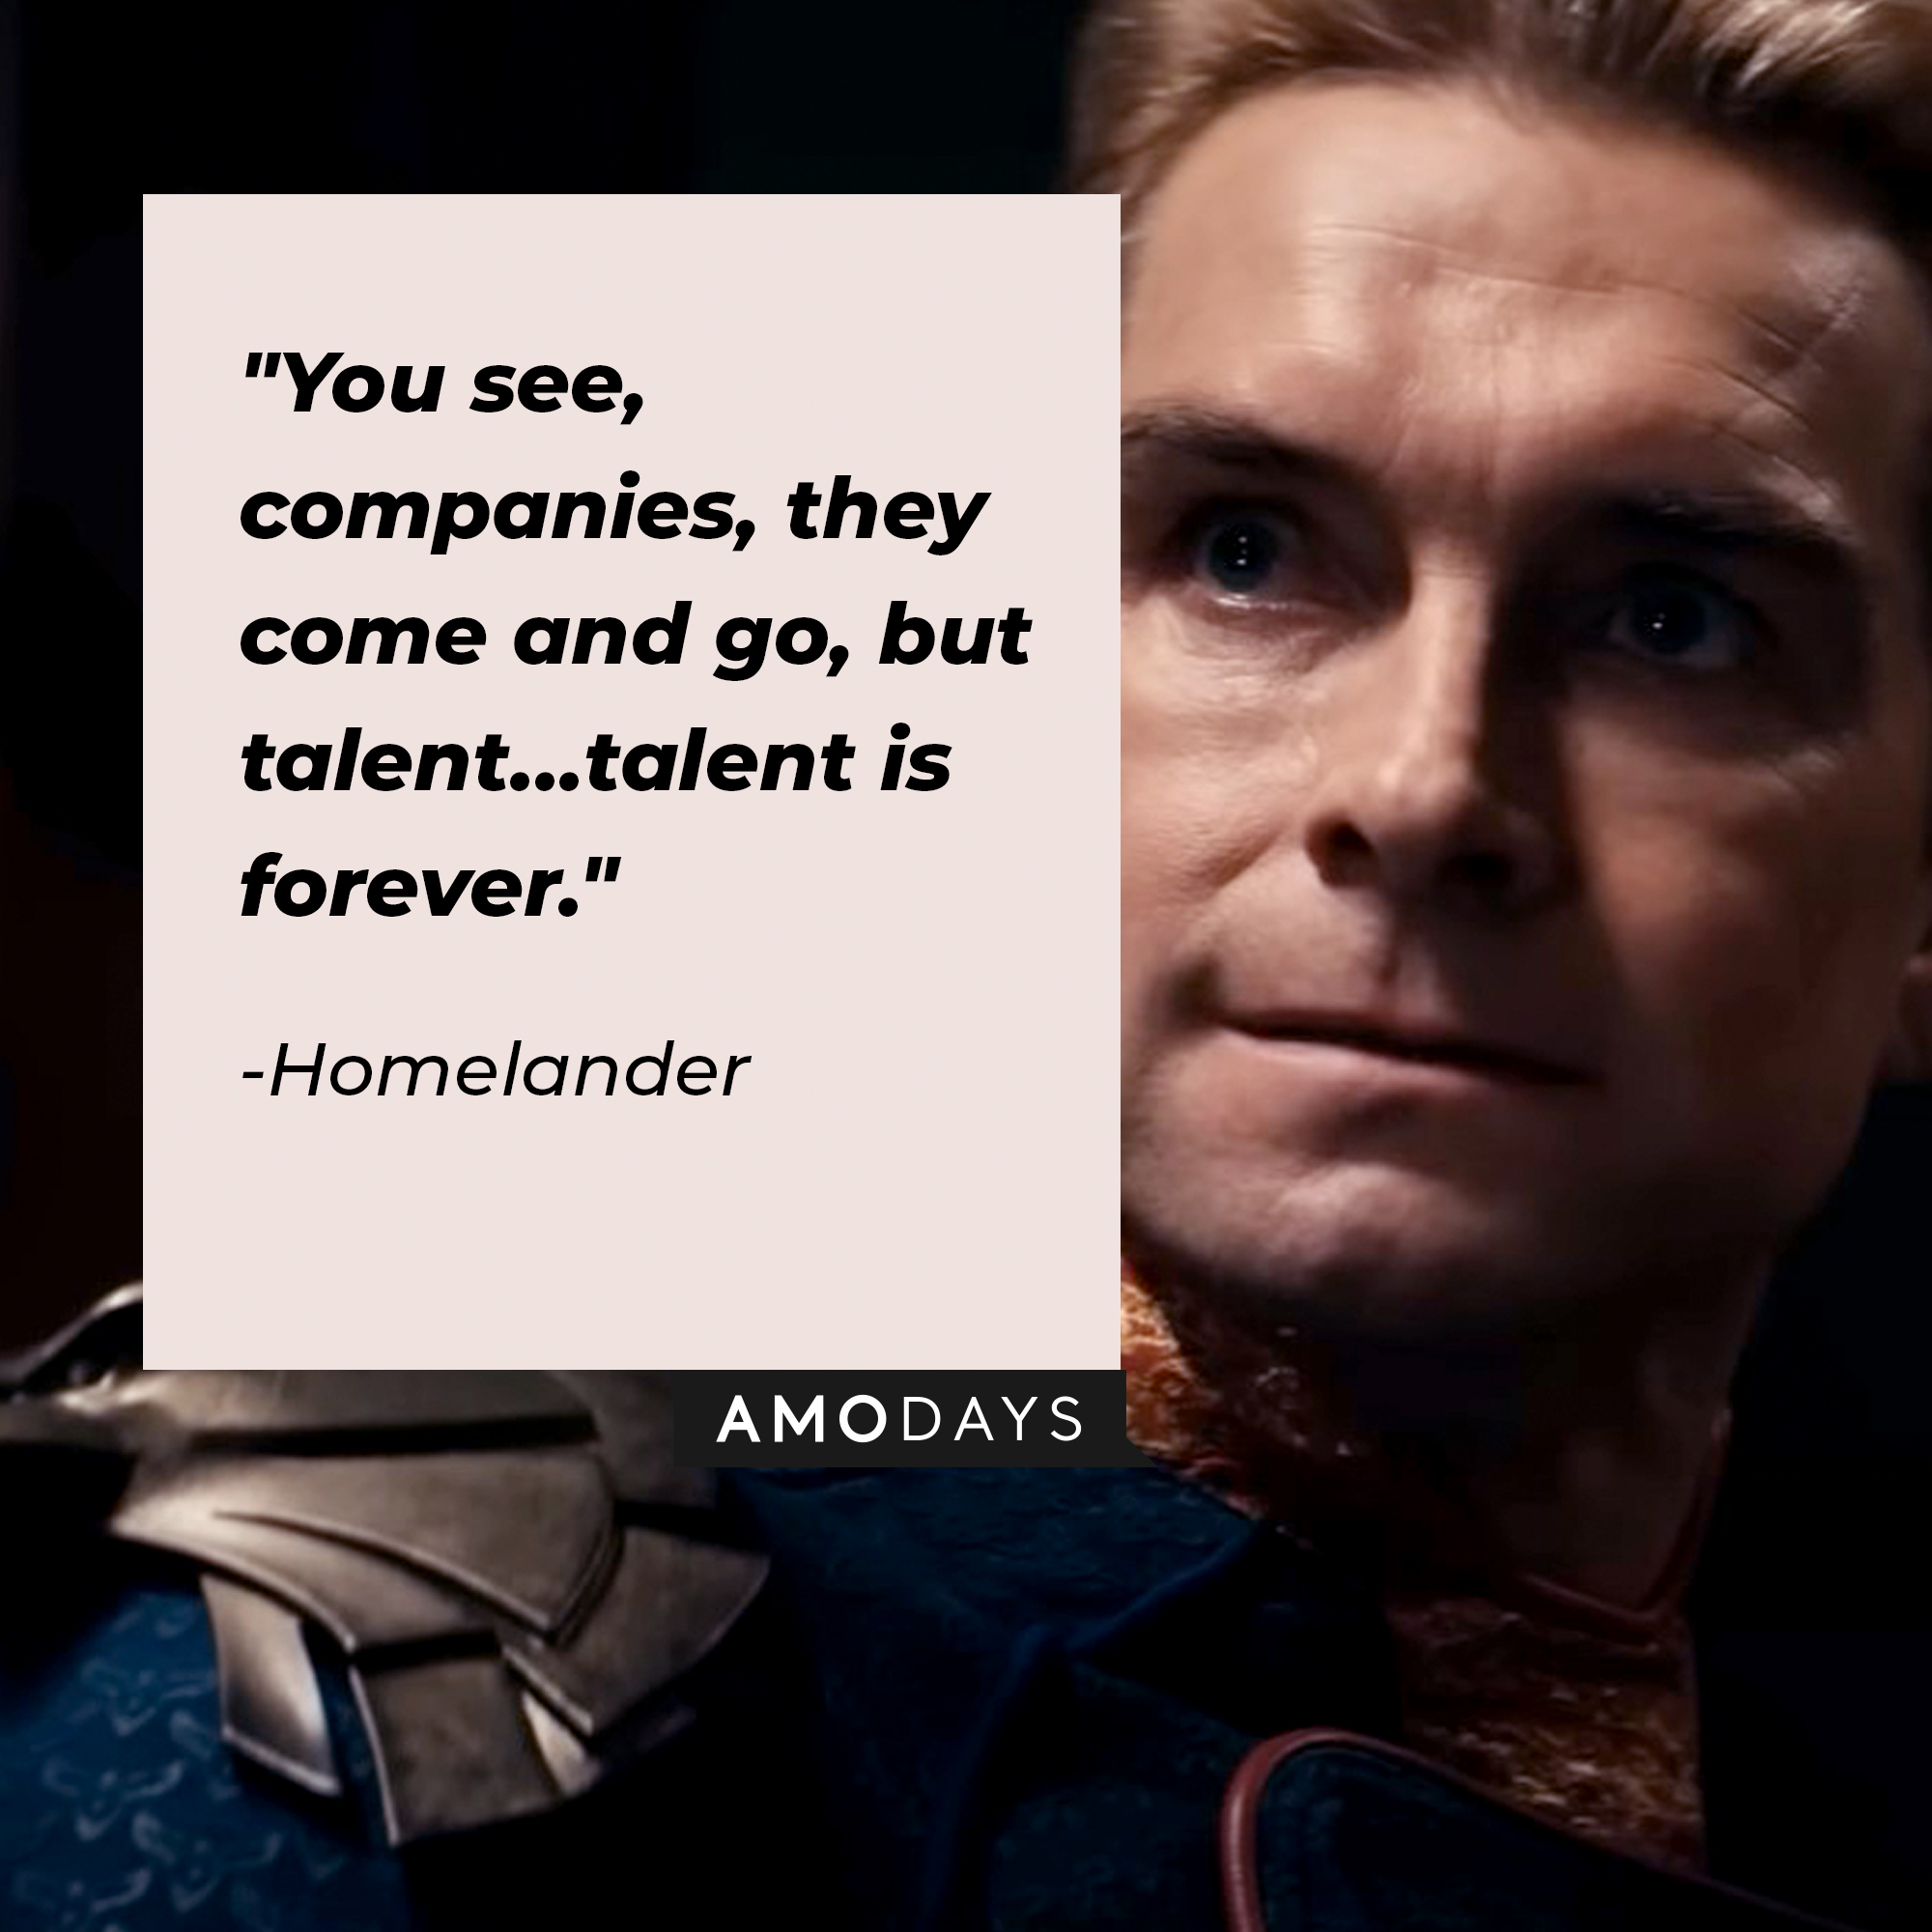 Homelander's quote: "You see, companies, they come and go, but talent… talent is forever." | Source: Facebook.com/TheBoysTV